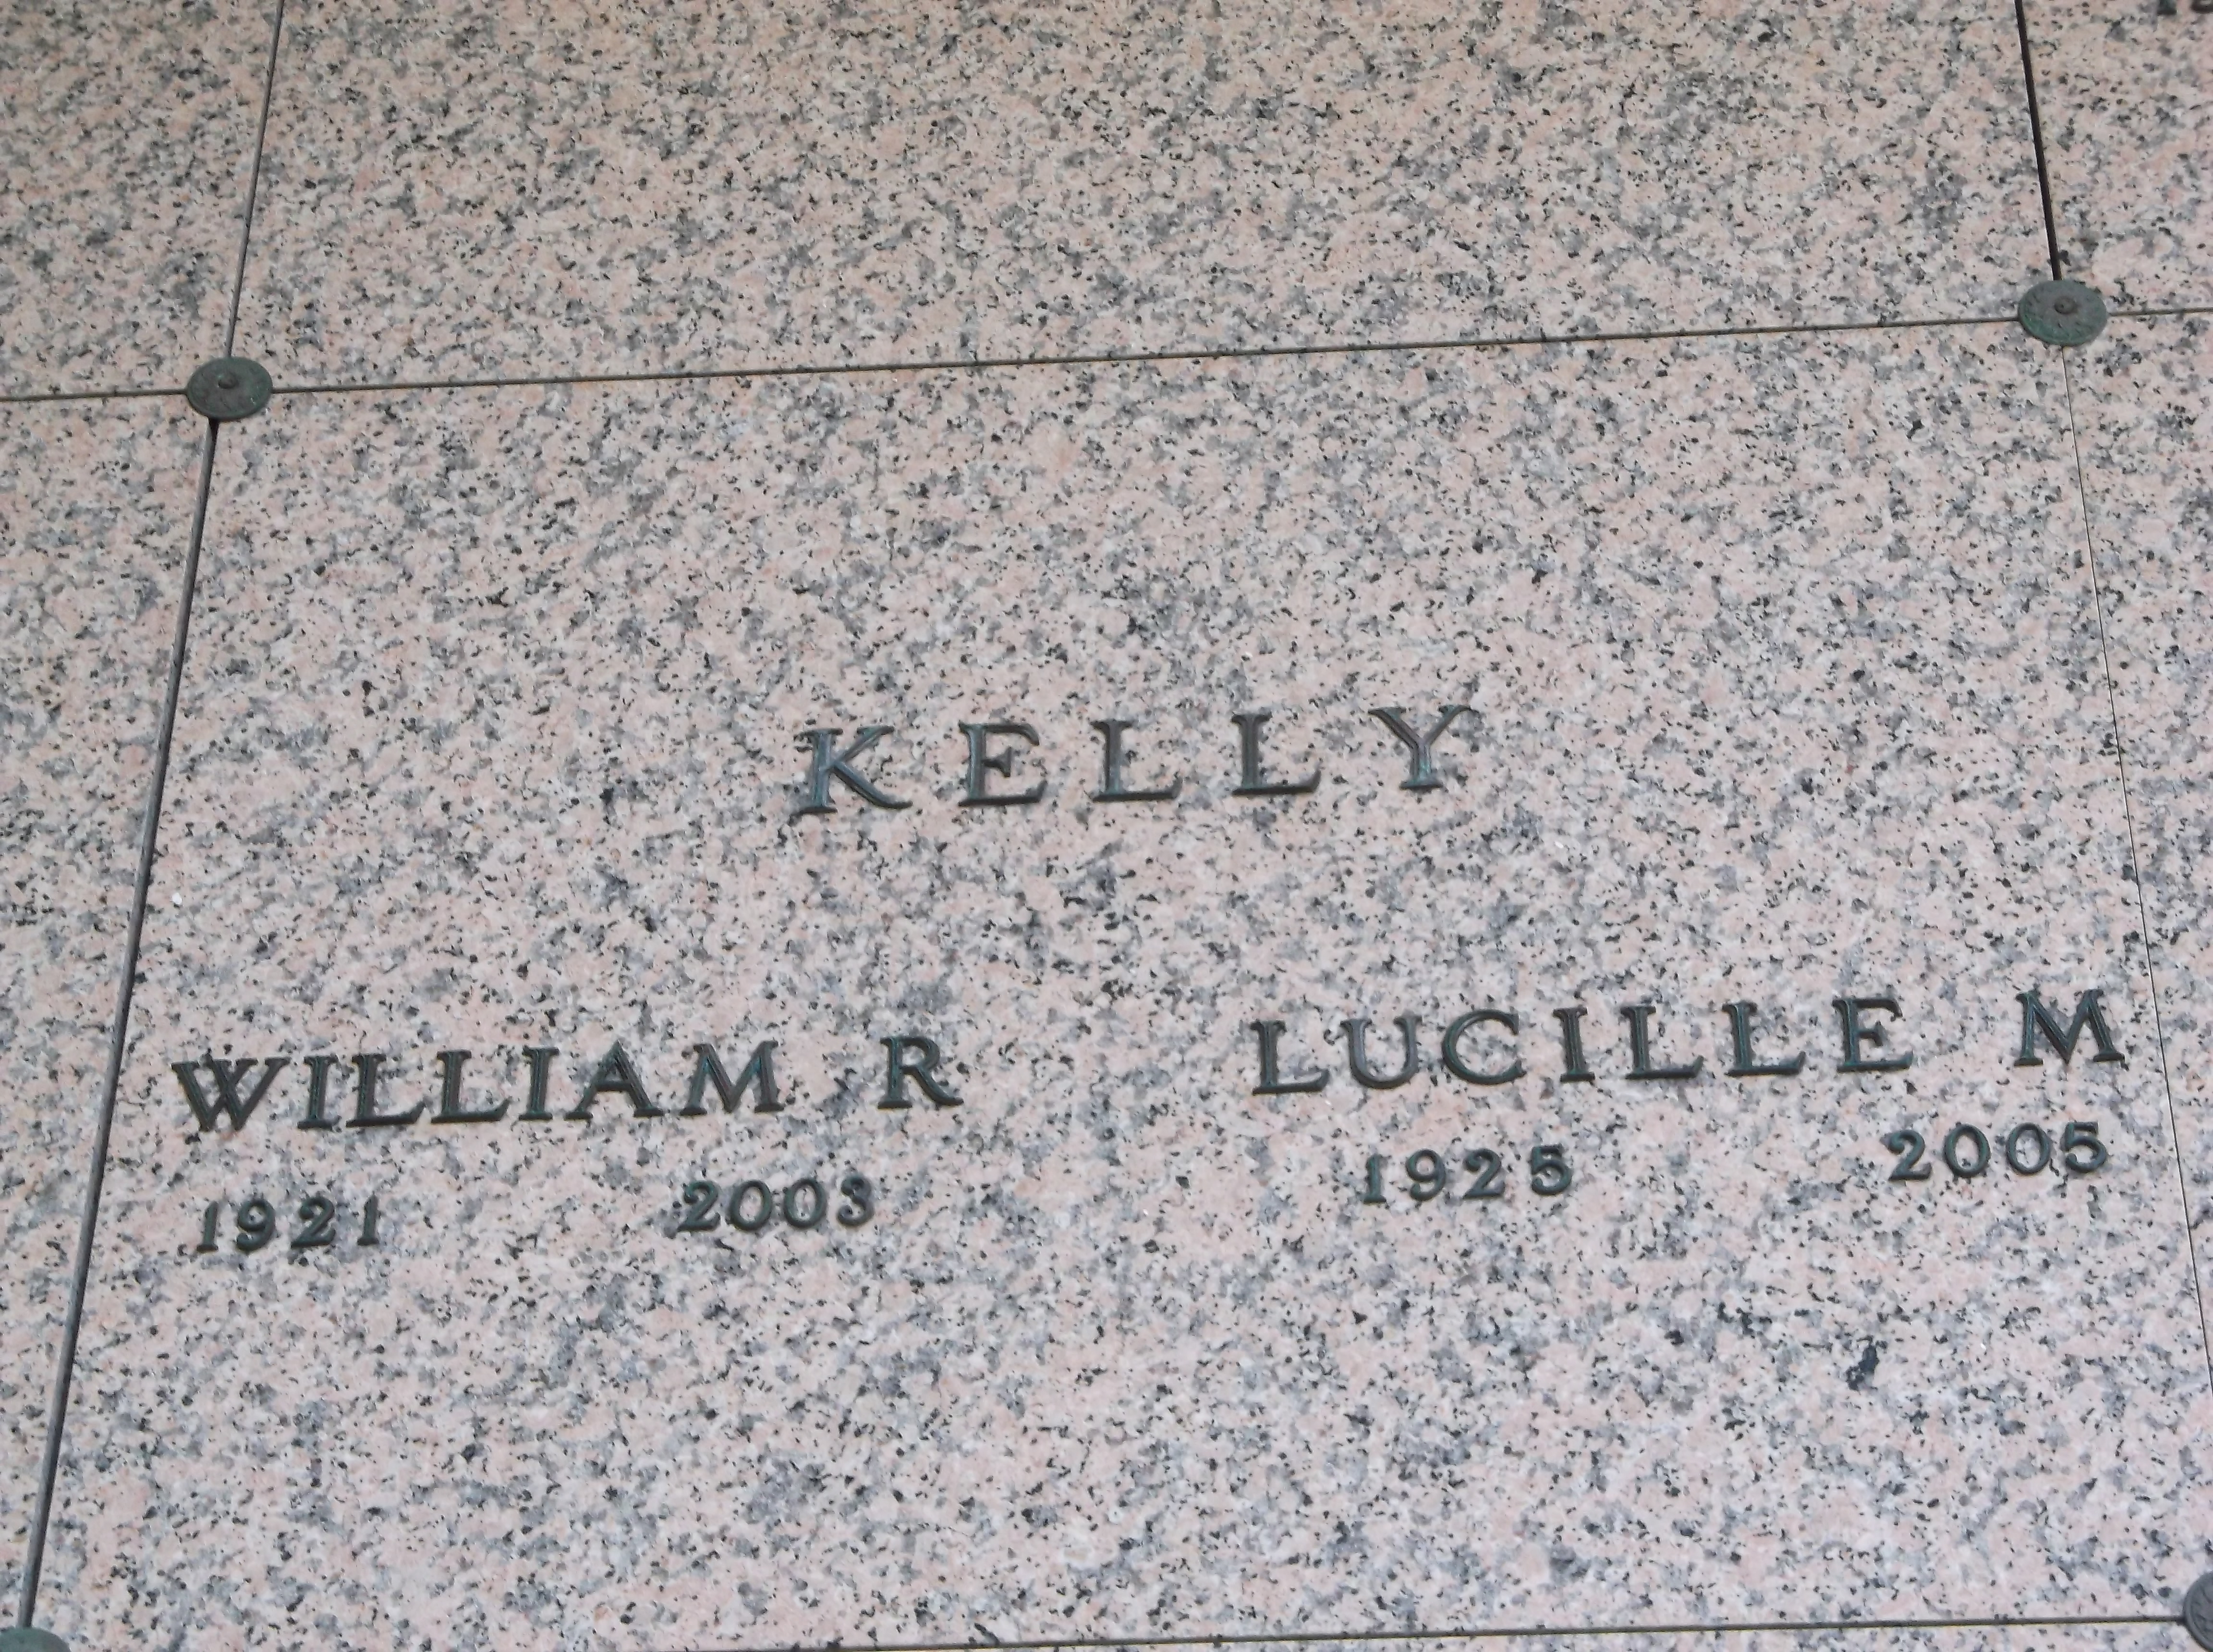 Lucille M Kelly